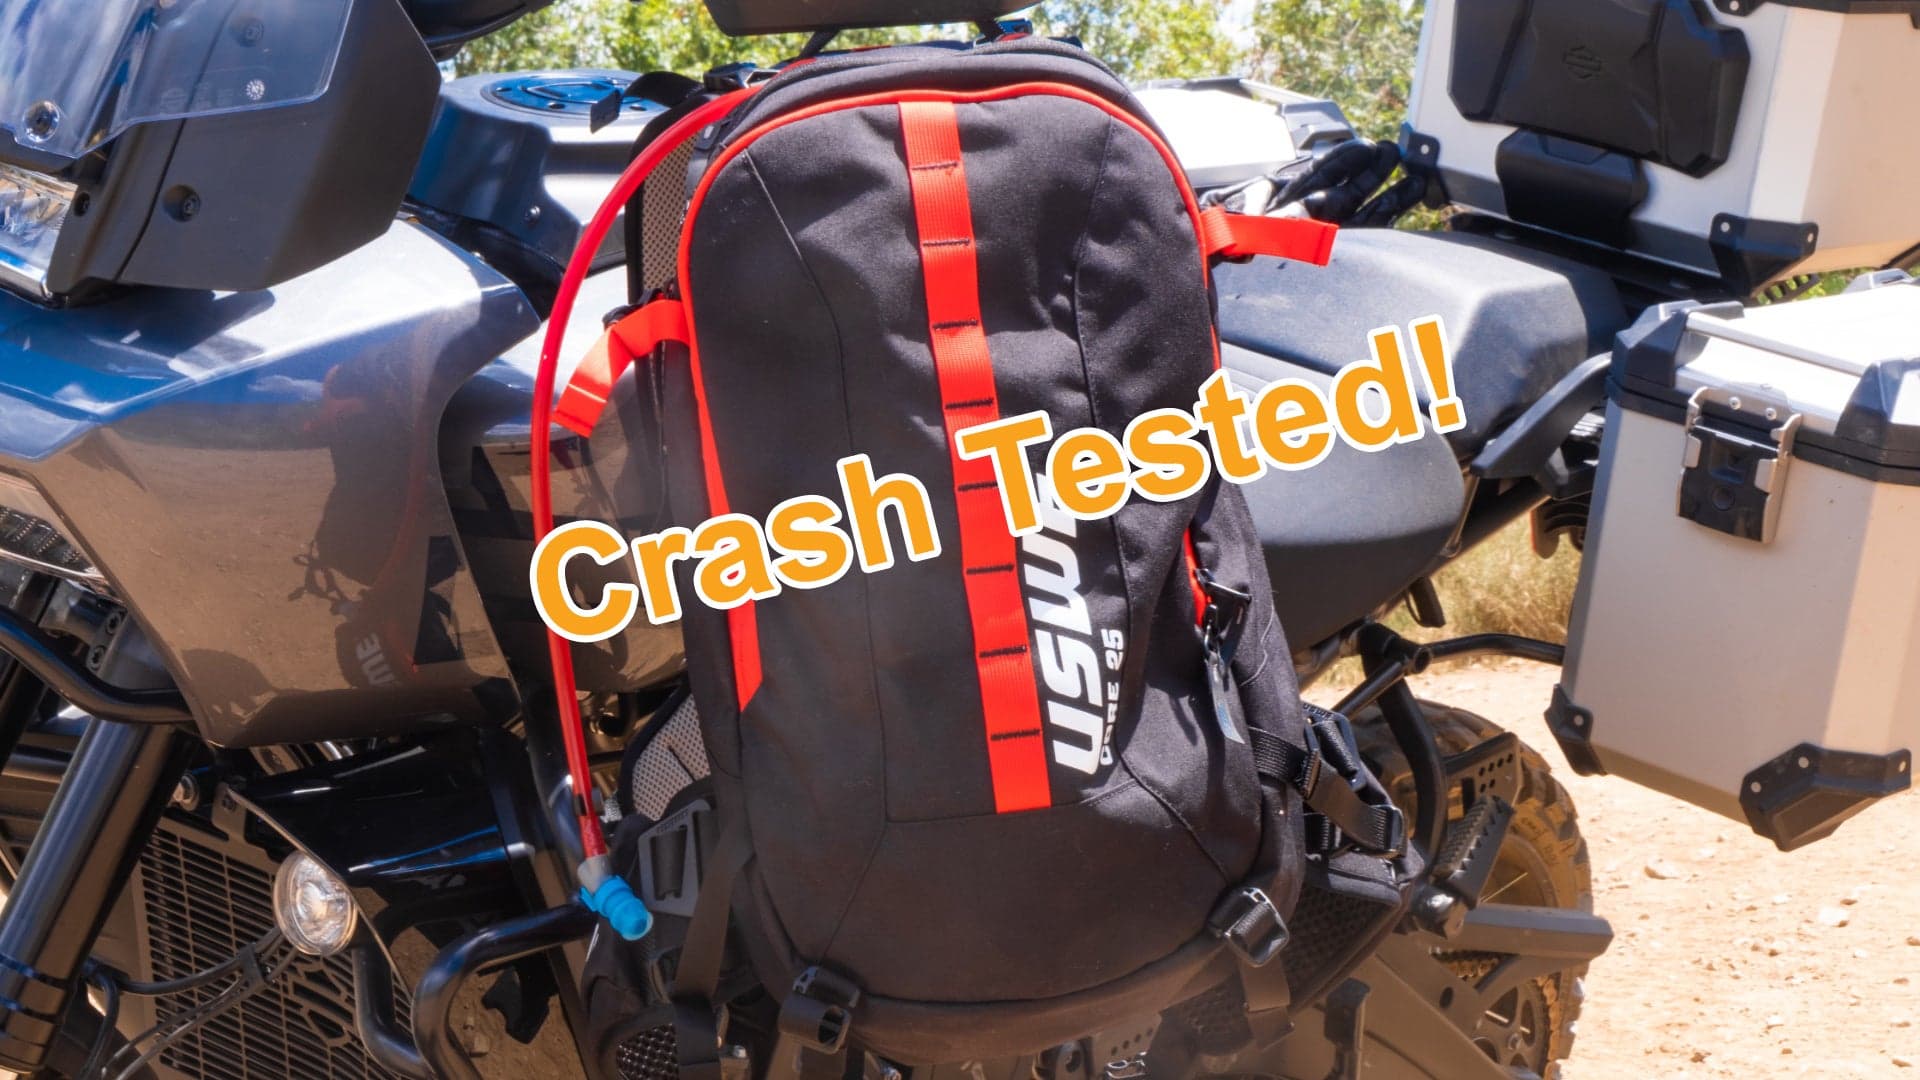 The USWE Core 25 Moto Backpack Will Actually Survive a Low Side